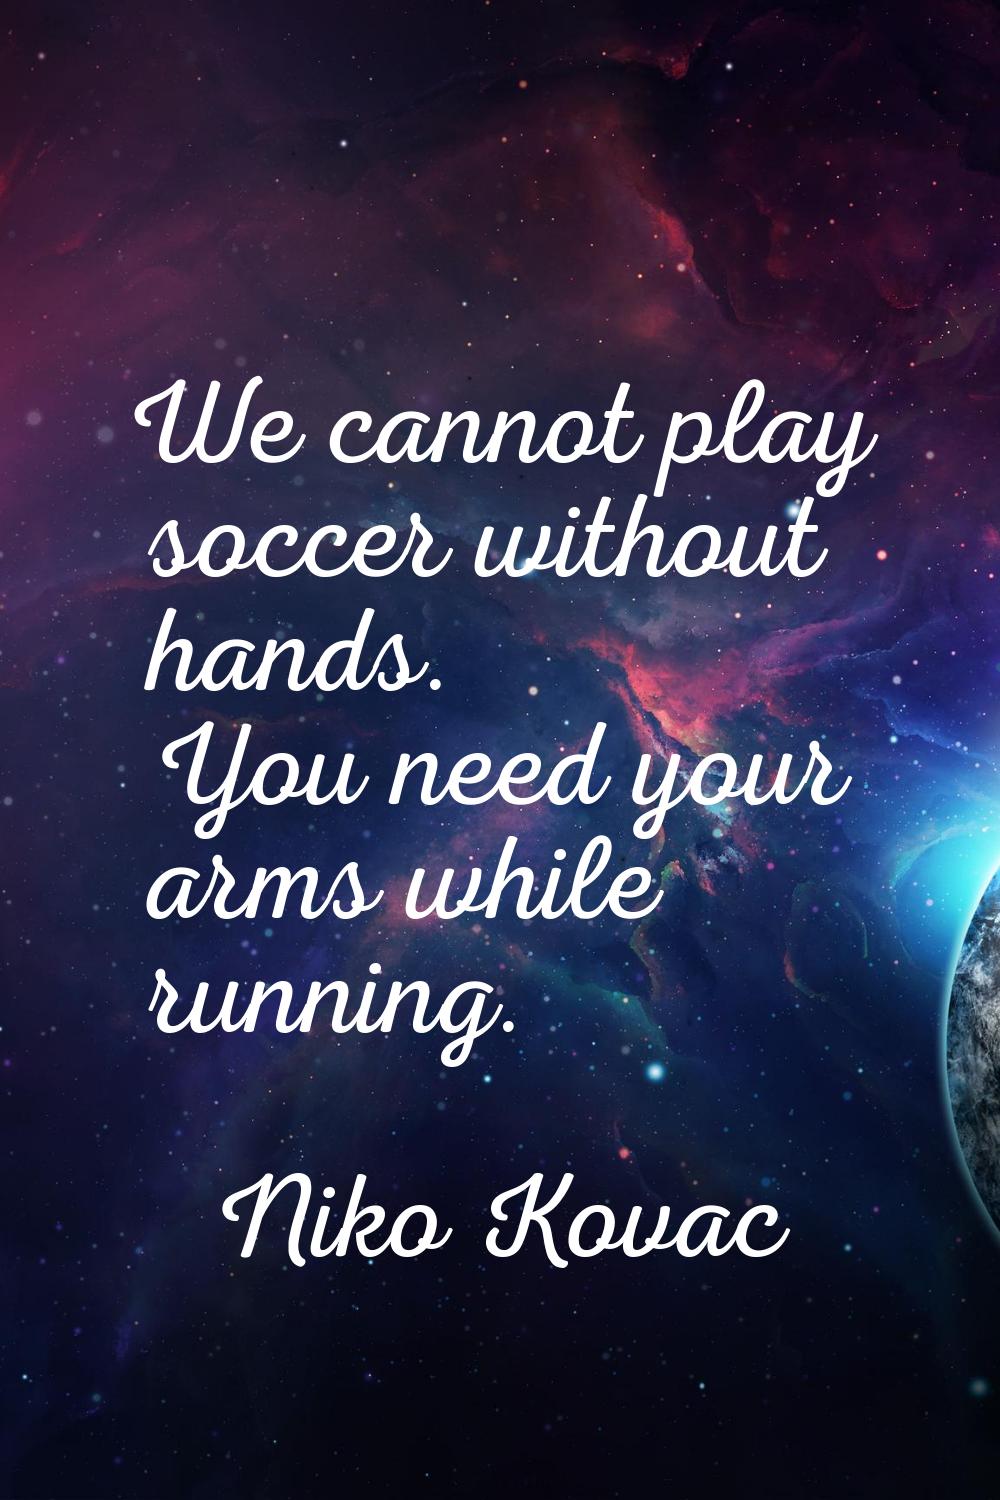 We cannot play soccer without hands. You need your arms while running.